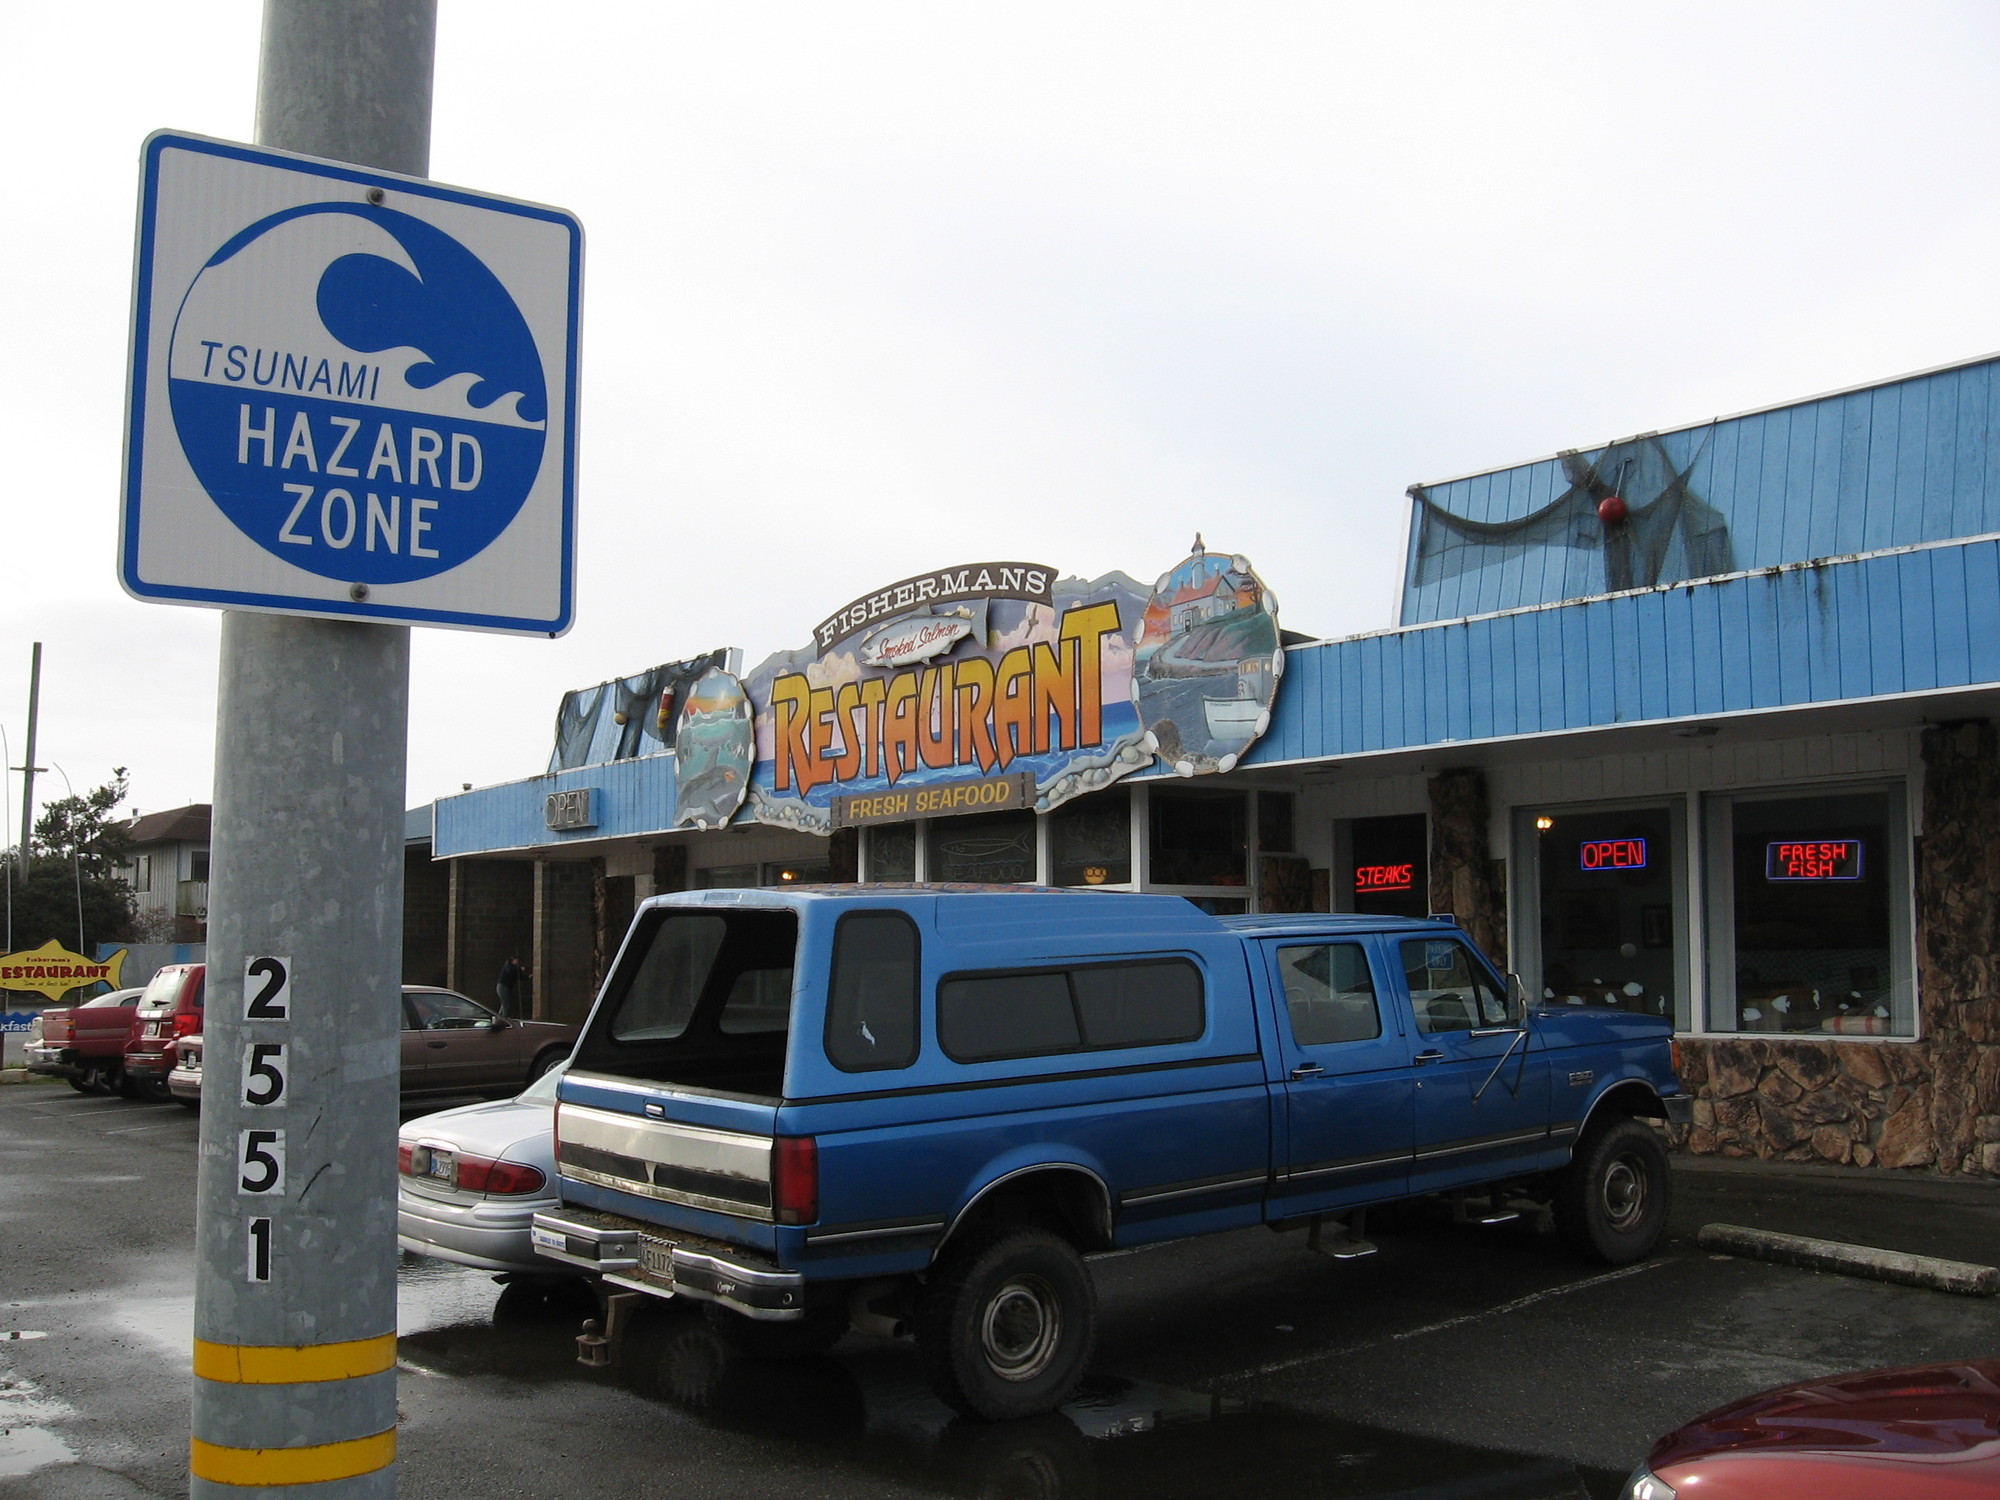 A tsunami warning sign in Crescent City, CA, which has a well-rehearsed response plan. (Craig Miller/KQED)